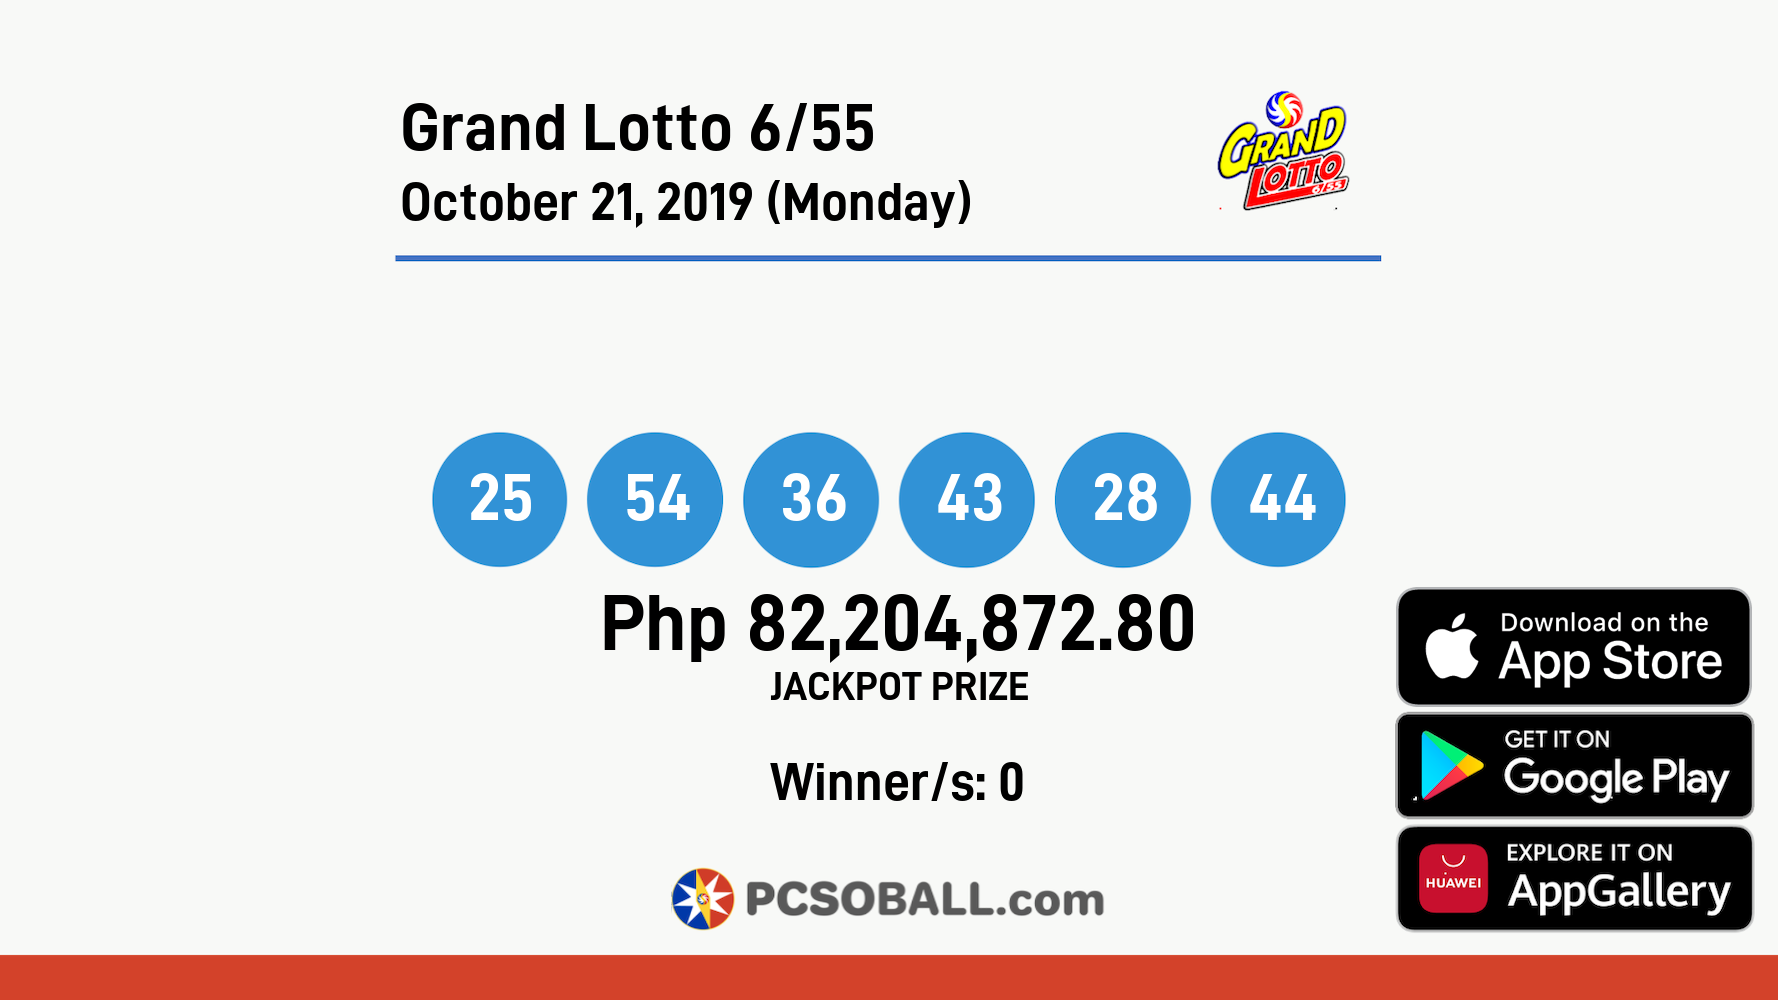 Grand Lotto 6/55 October 21, 2019 (Monday) Result